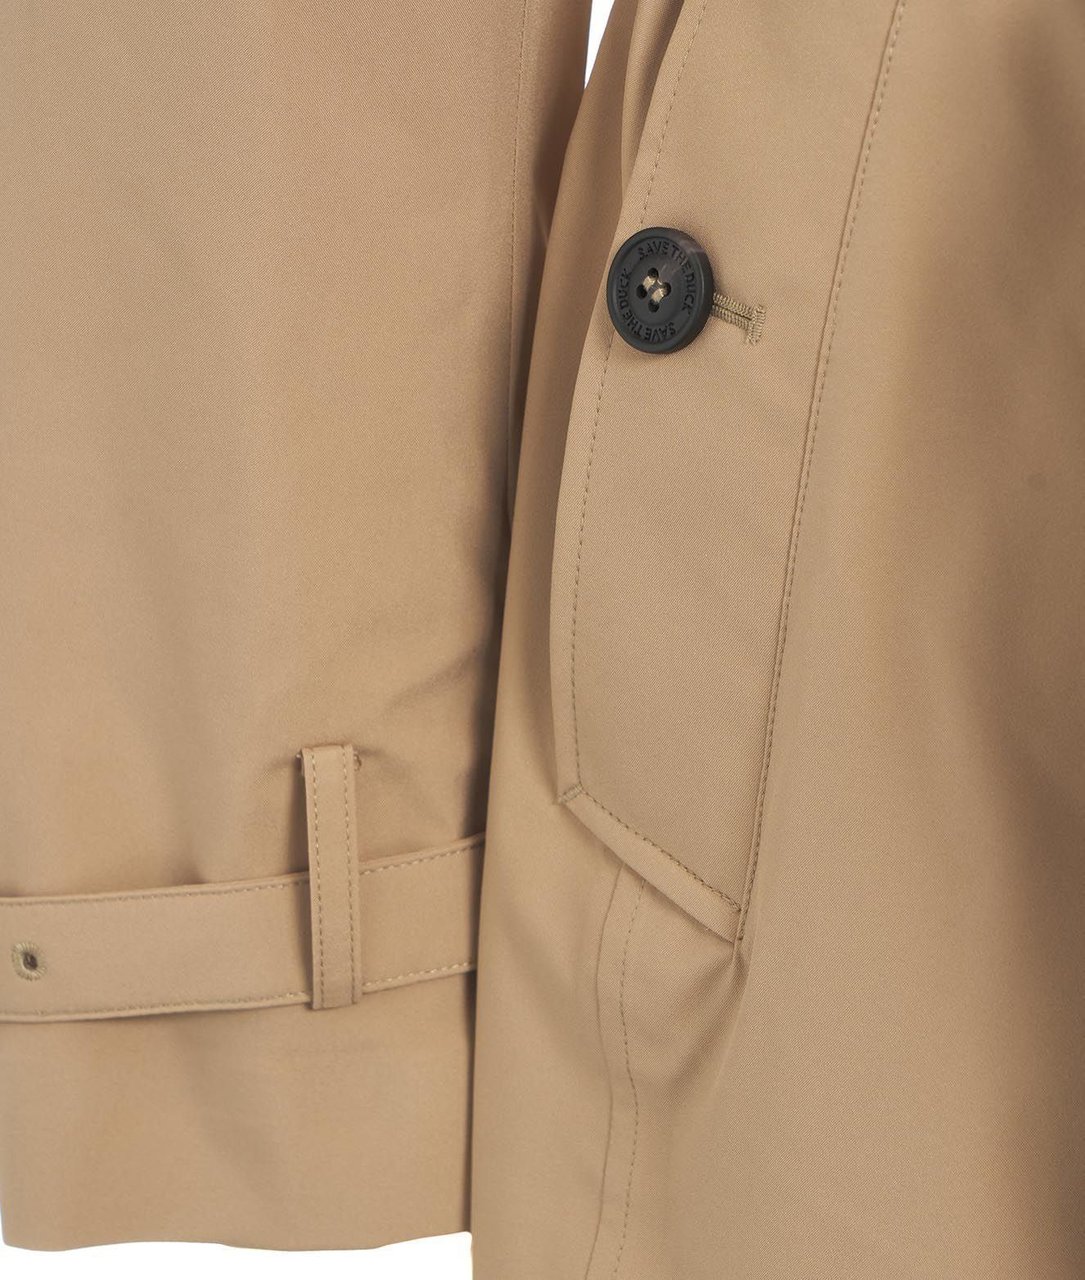 Save the Duck Double-breasted trench coat "Audrey" Beige